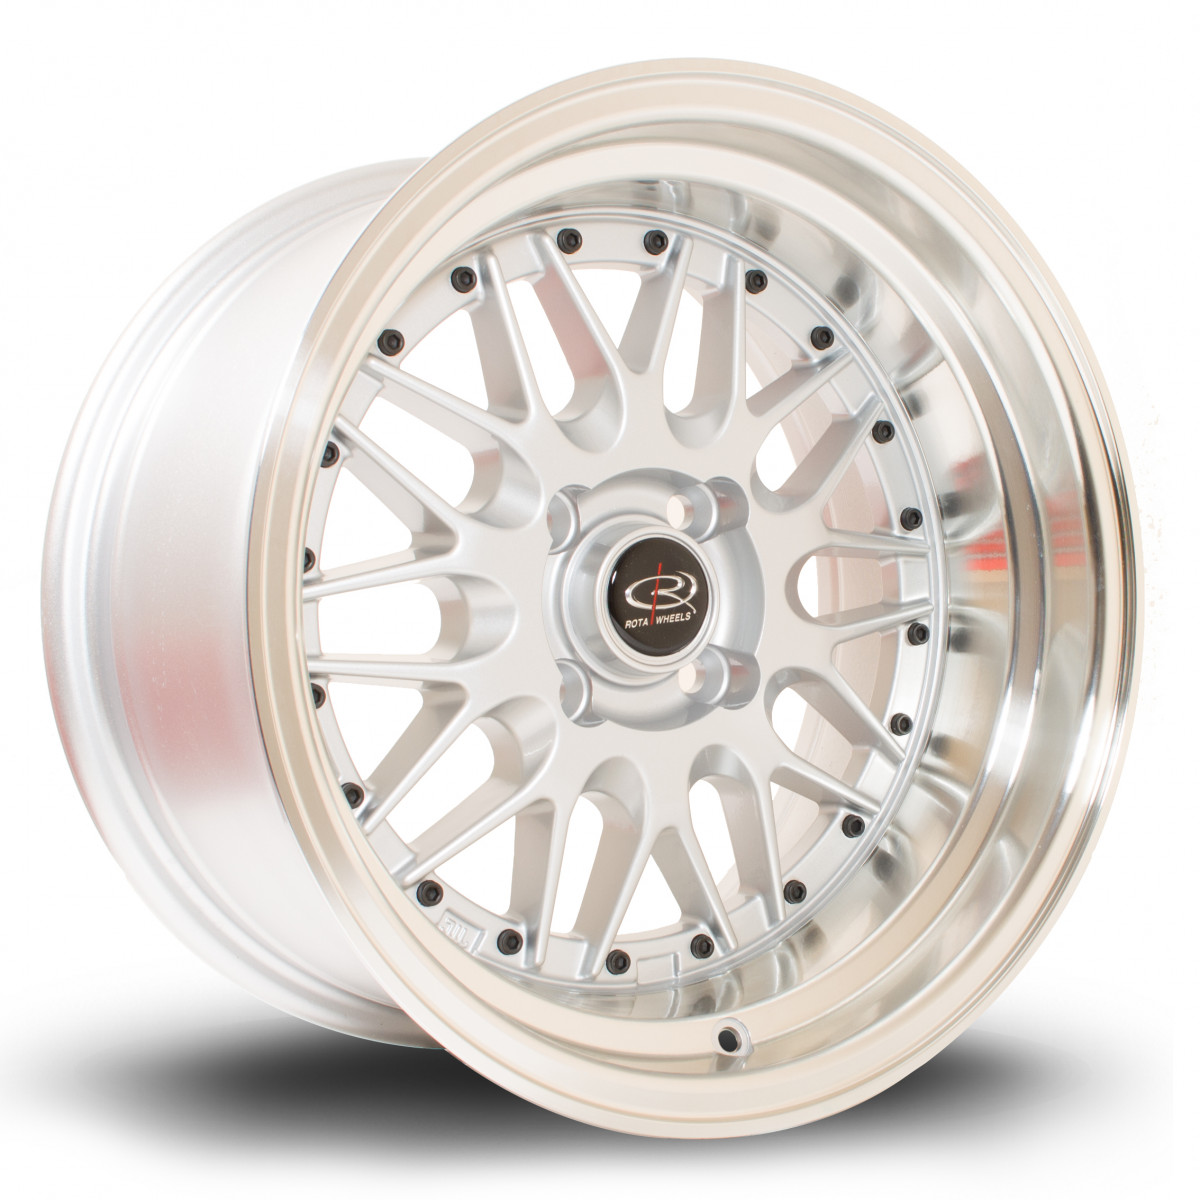 Kensei 15x8 4x100 ET0 Silver with Polished Lip